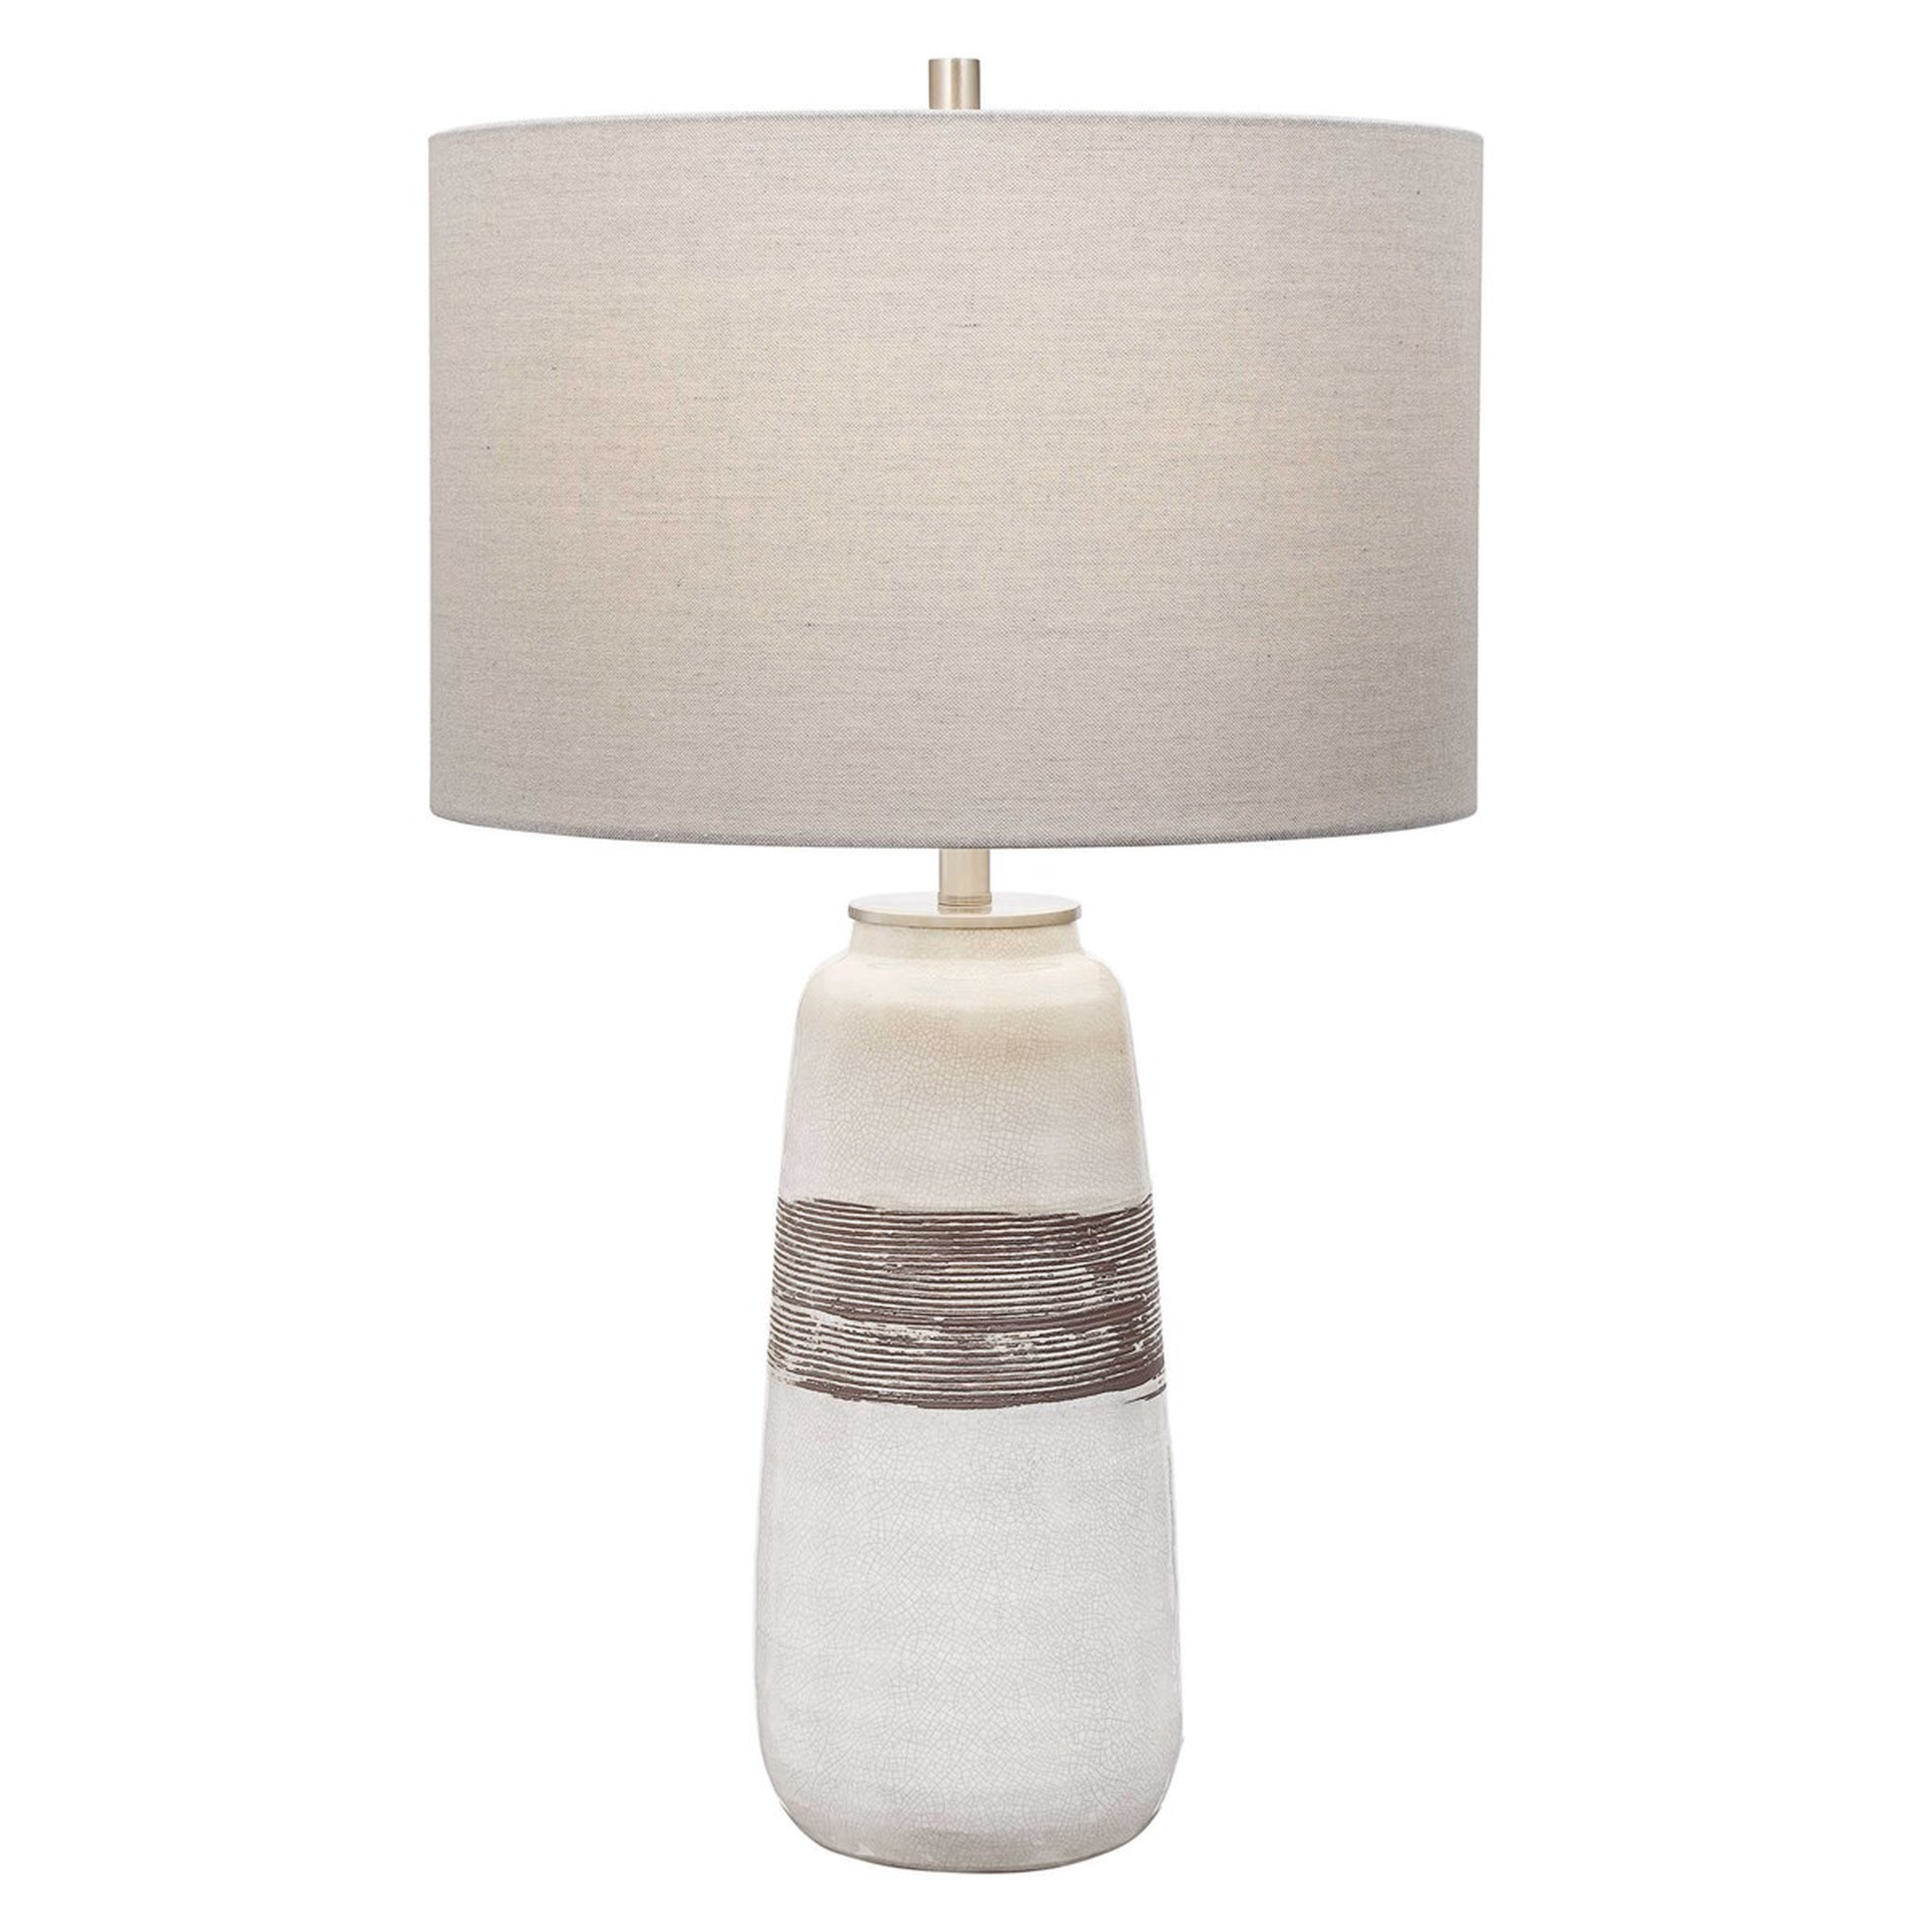 Comanche Table Lamp - Hudsonhill Foundry